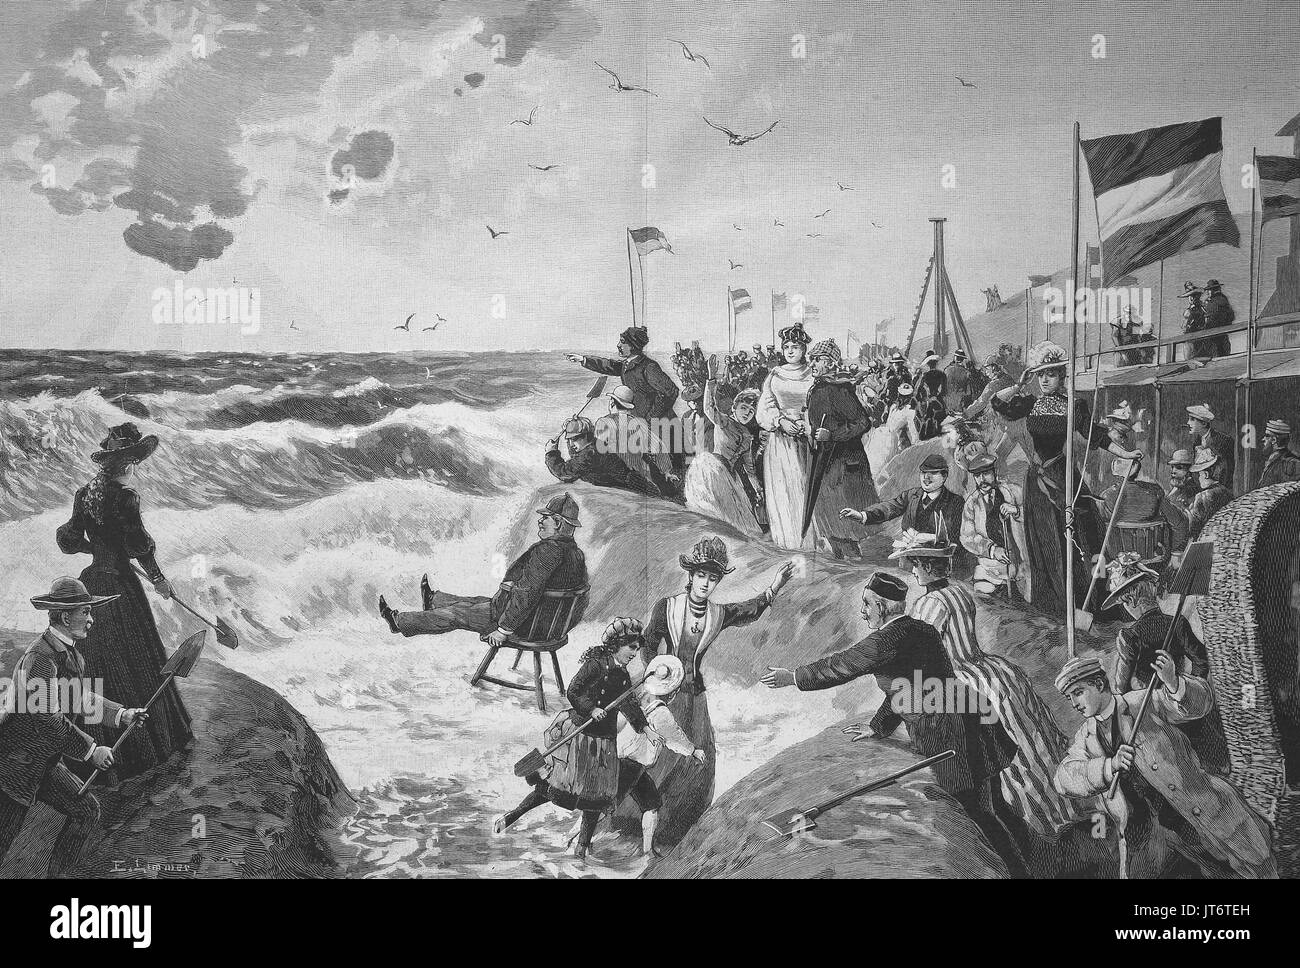 Summer vacationers on the beach of Westerland on Sylt, Germany, high waves, Digital improved reproduction of an image published between 1880 - 1885 Stock Photo